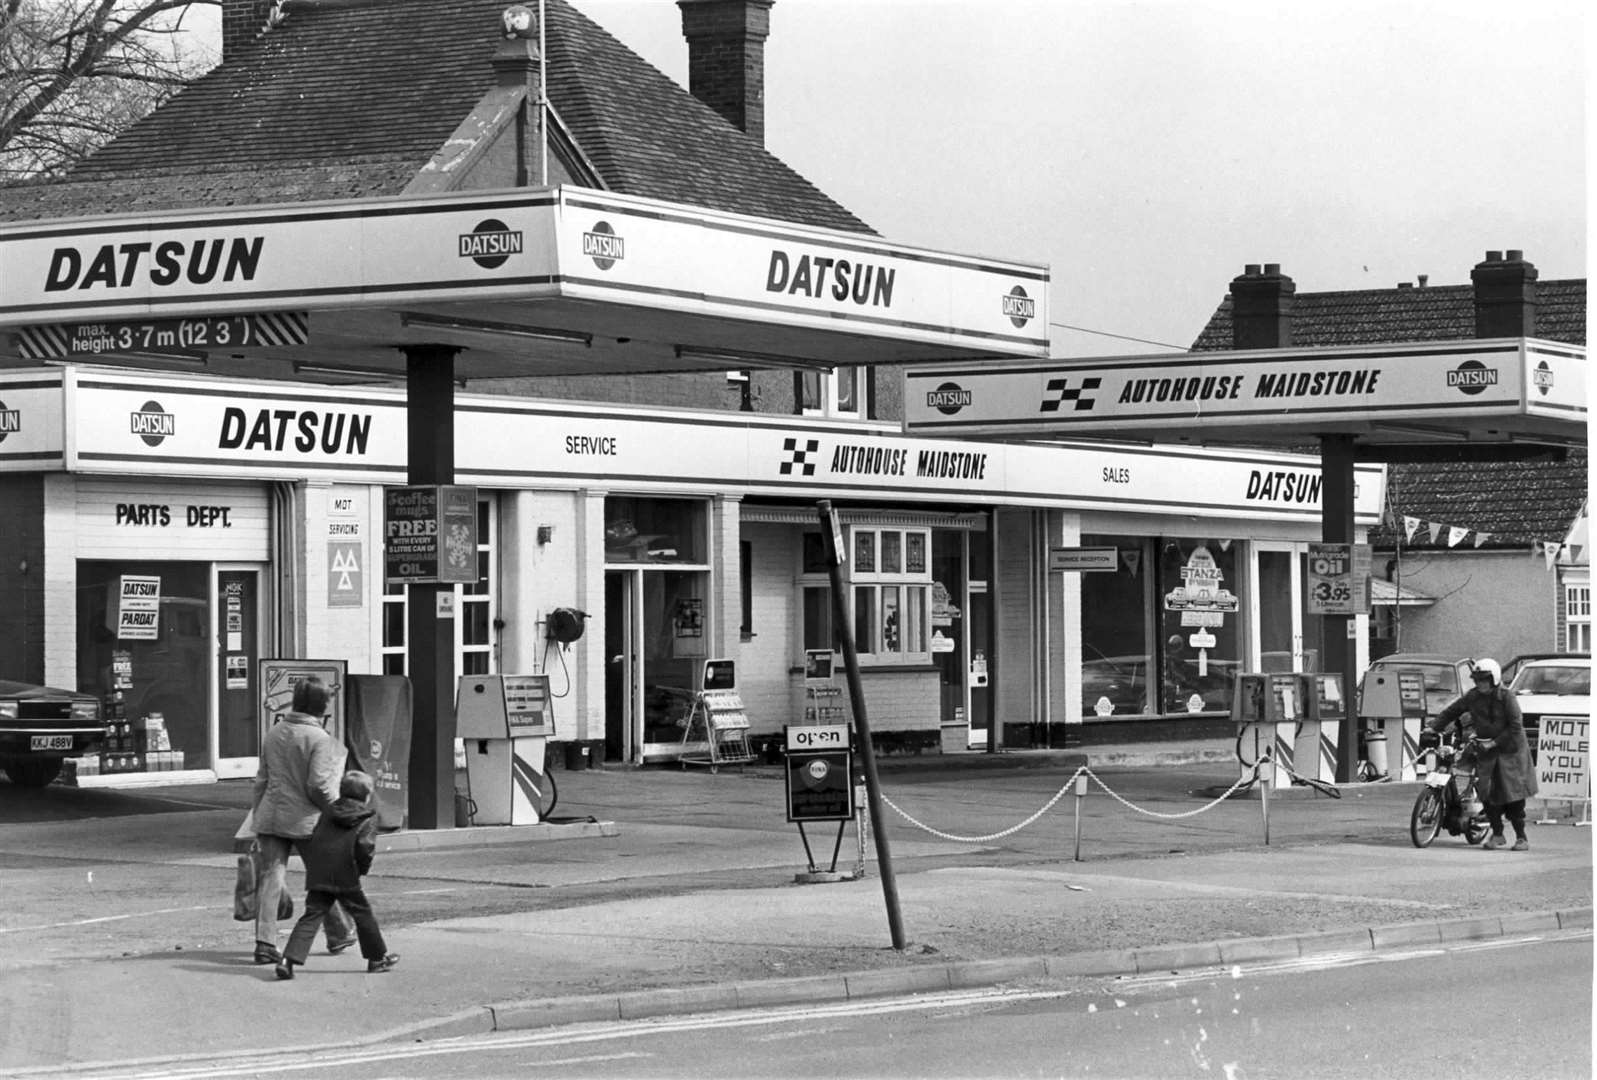 The Datsun Garage on the A20 at Larkfield in April 1982